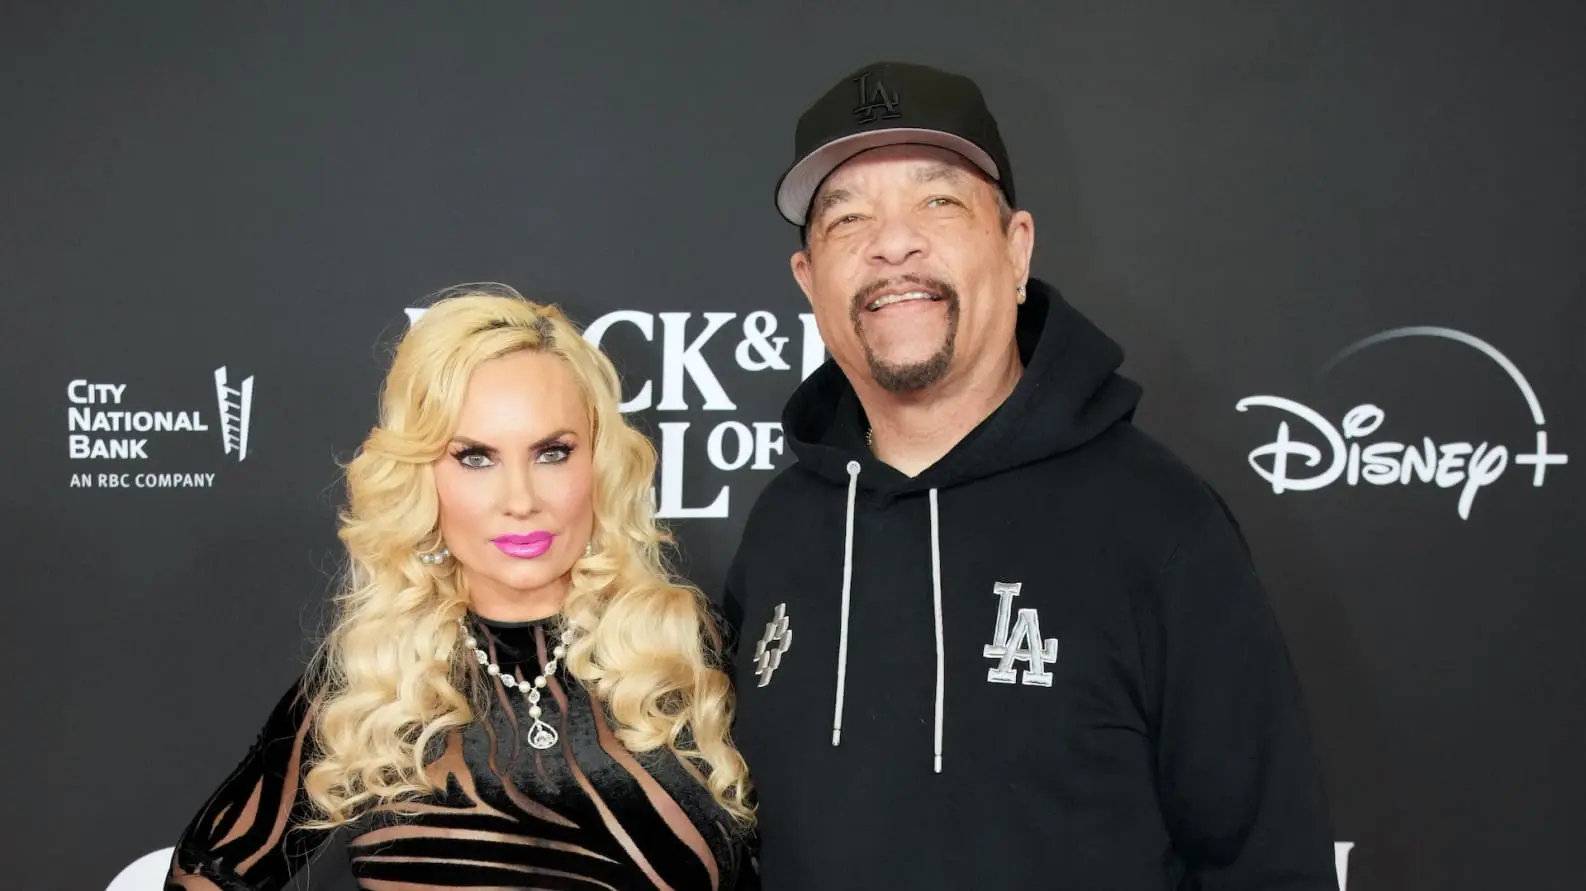 Ice T’s Wife Coco Celebrates 23rd Anniversary with a Stunning Vow Renewal Throwback [Photos]